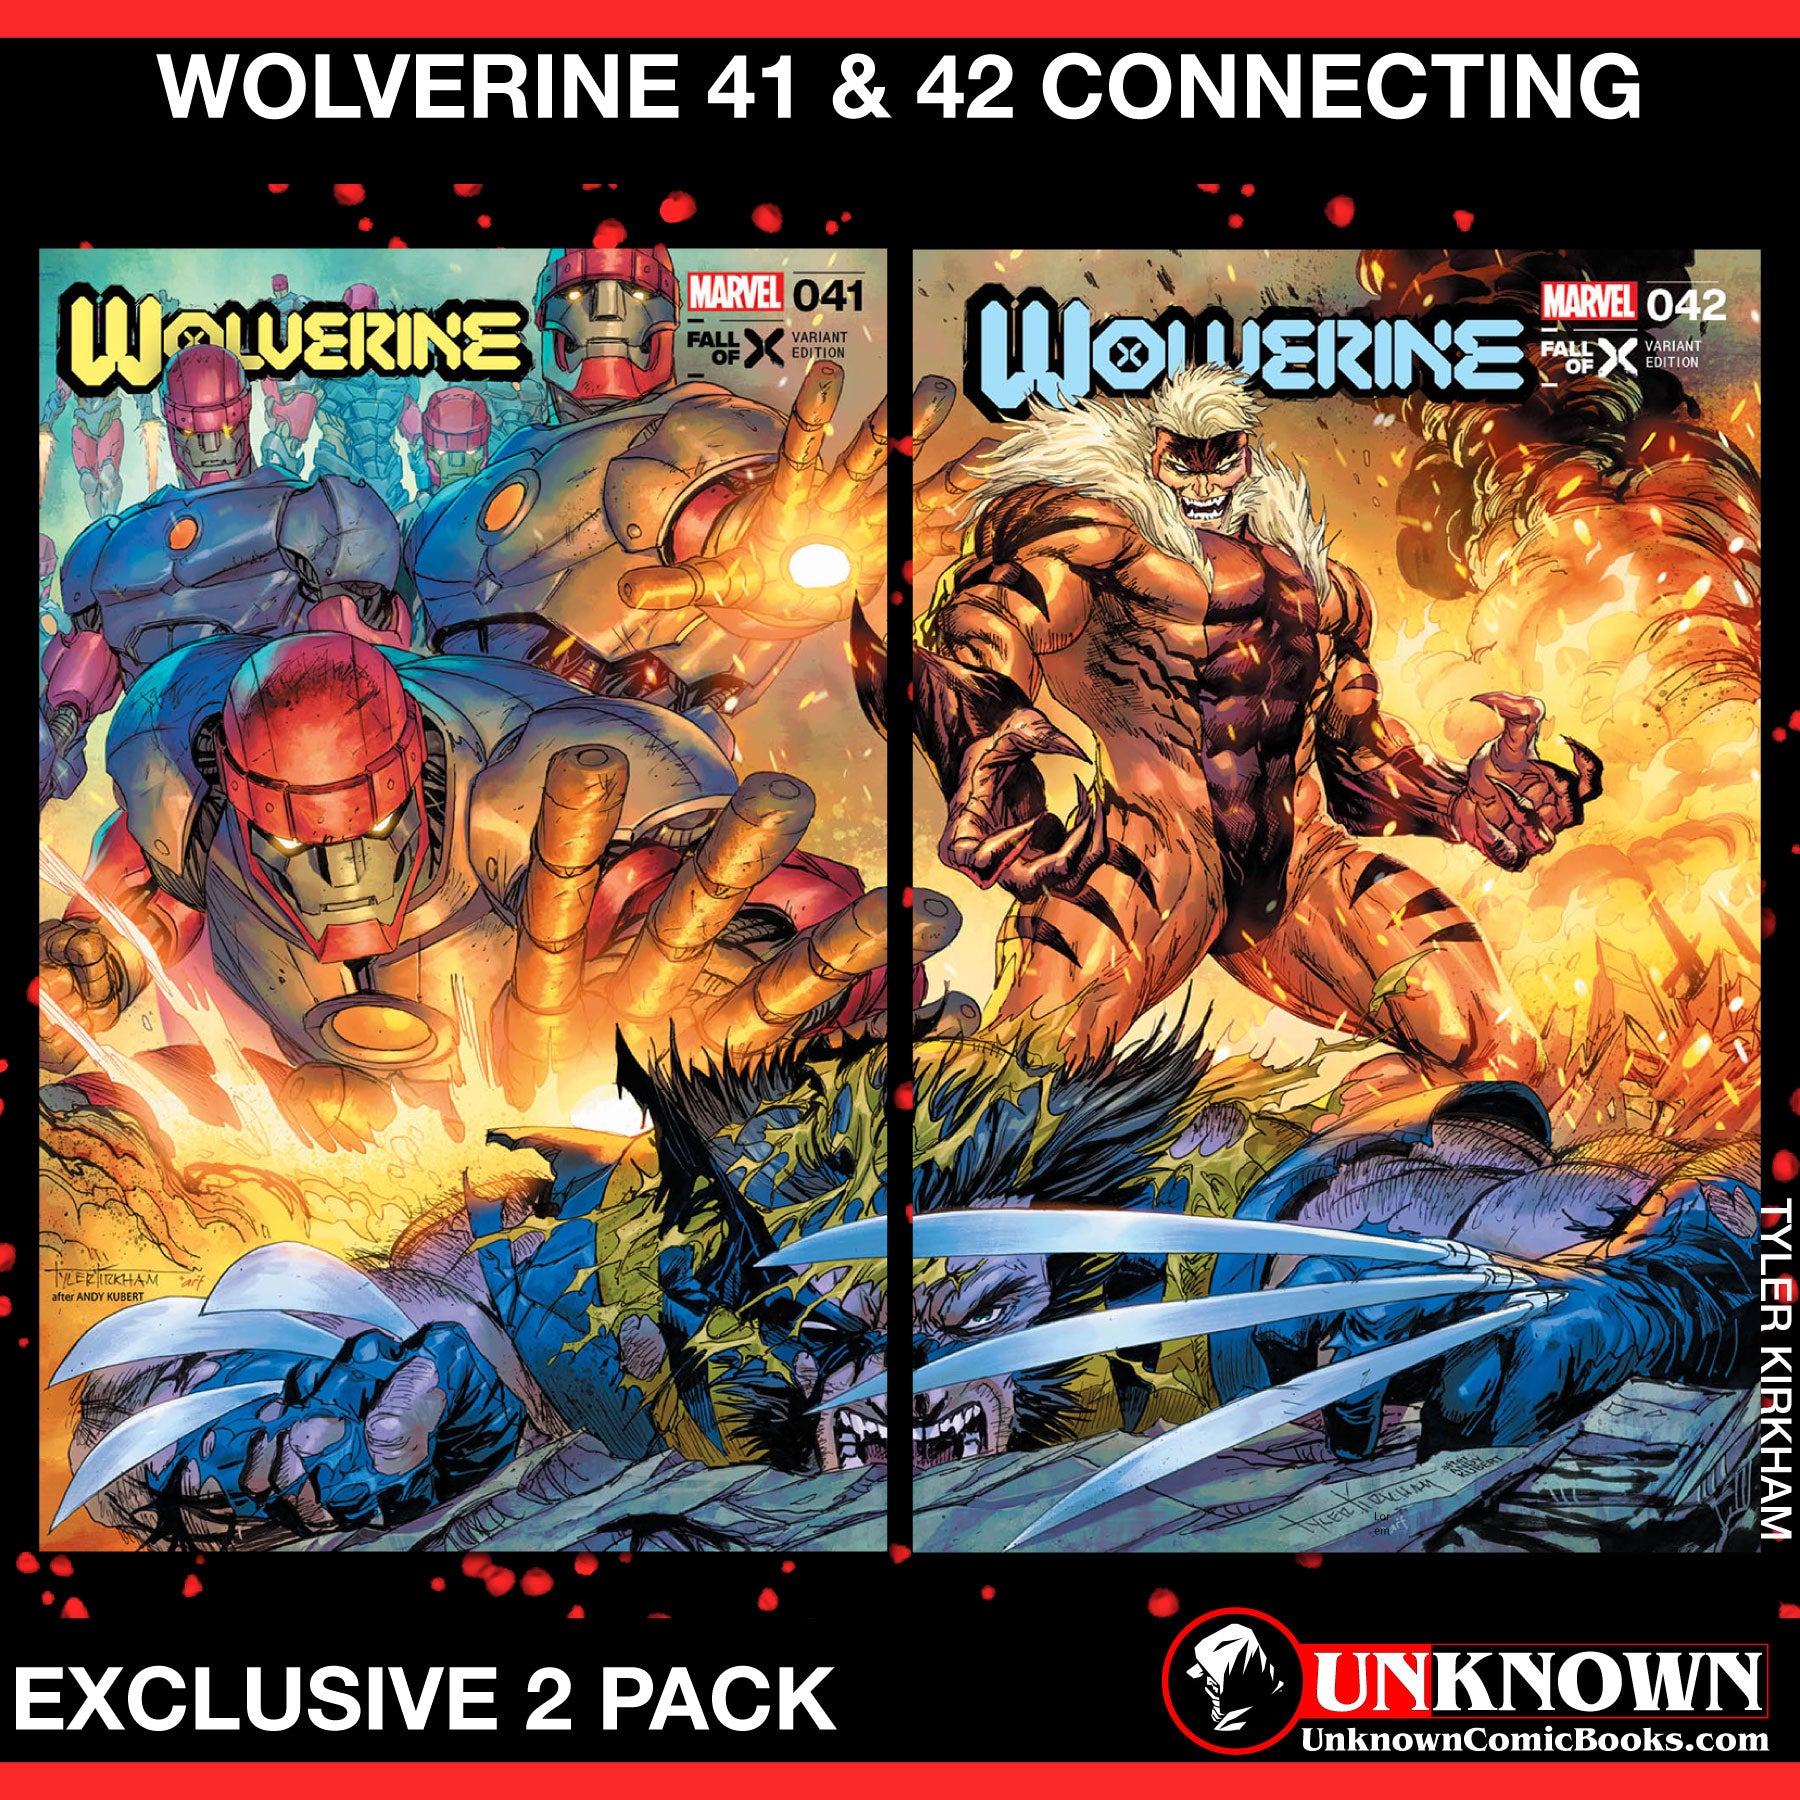 [2 PACK TRADE] WOLVERINE #41 & #42 UNKNOWN COMICS TYLER KIRKHAM EXCLUSIVE CONNECTING VAR (01/31/2024)